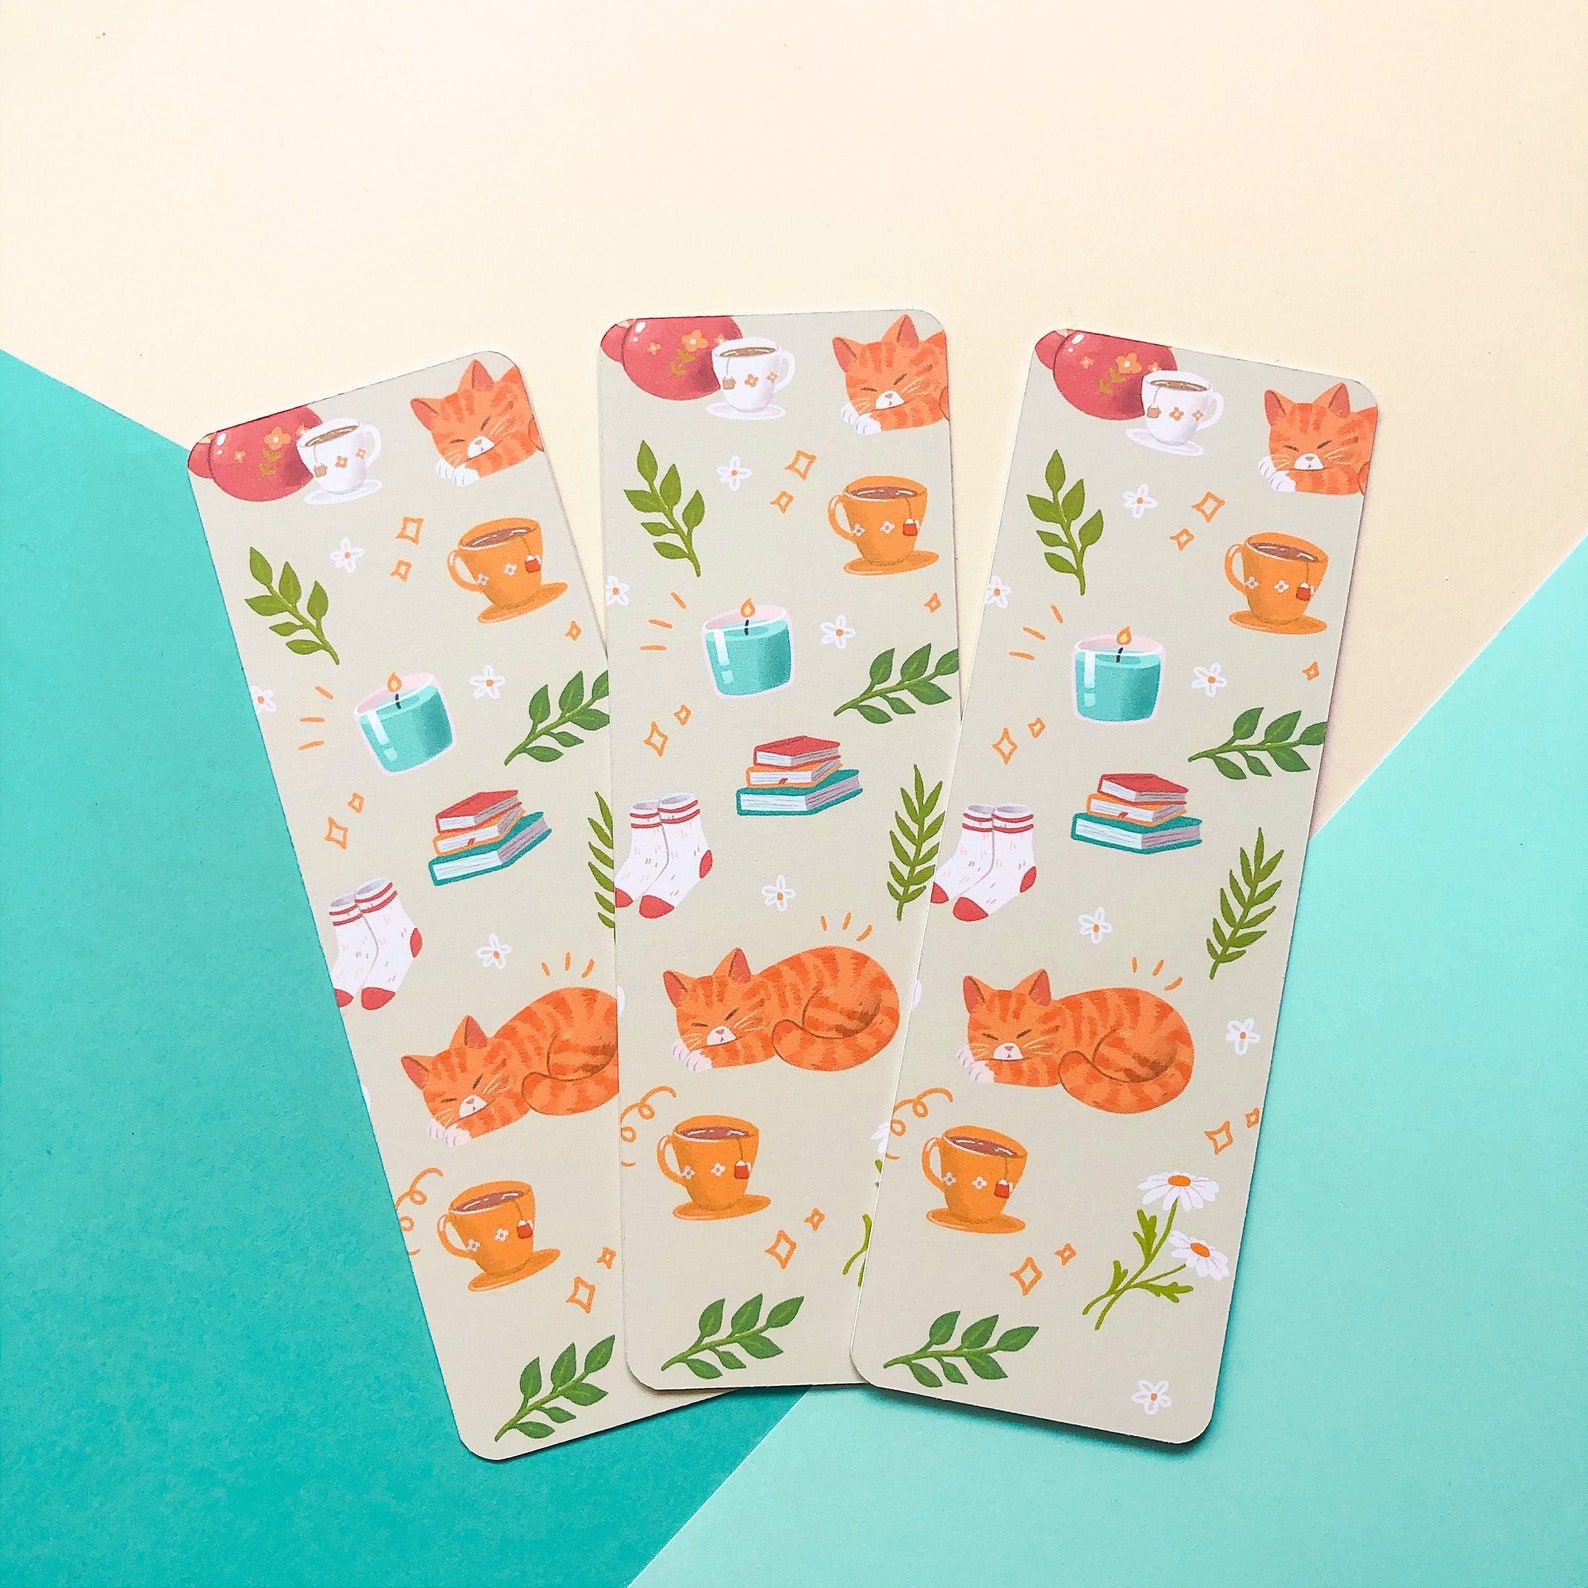 Image of three bookmarks on a teal background. The bookmarks are light  brown and feature a tabby cat, flowers, socks, and tea. 